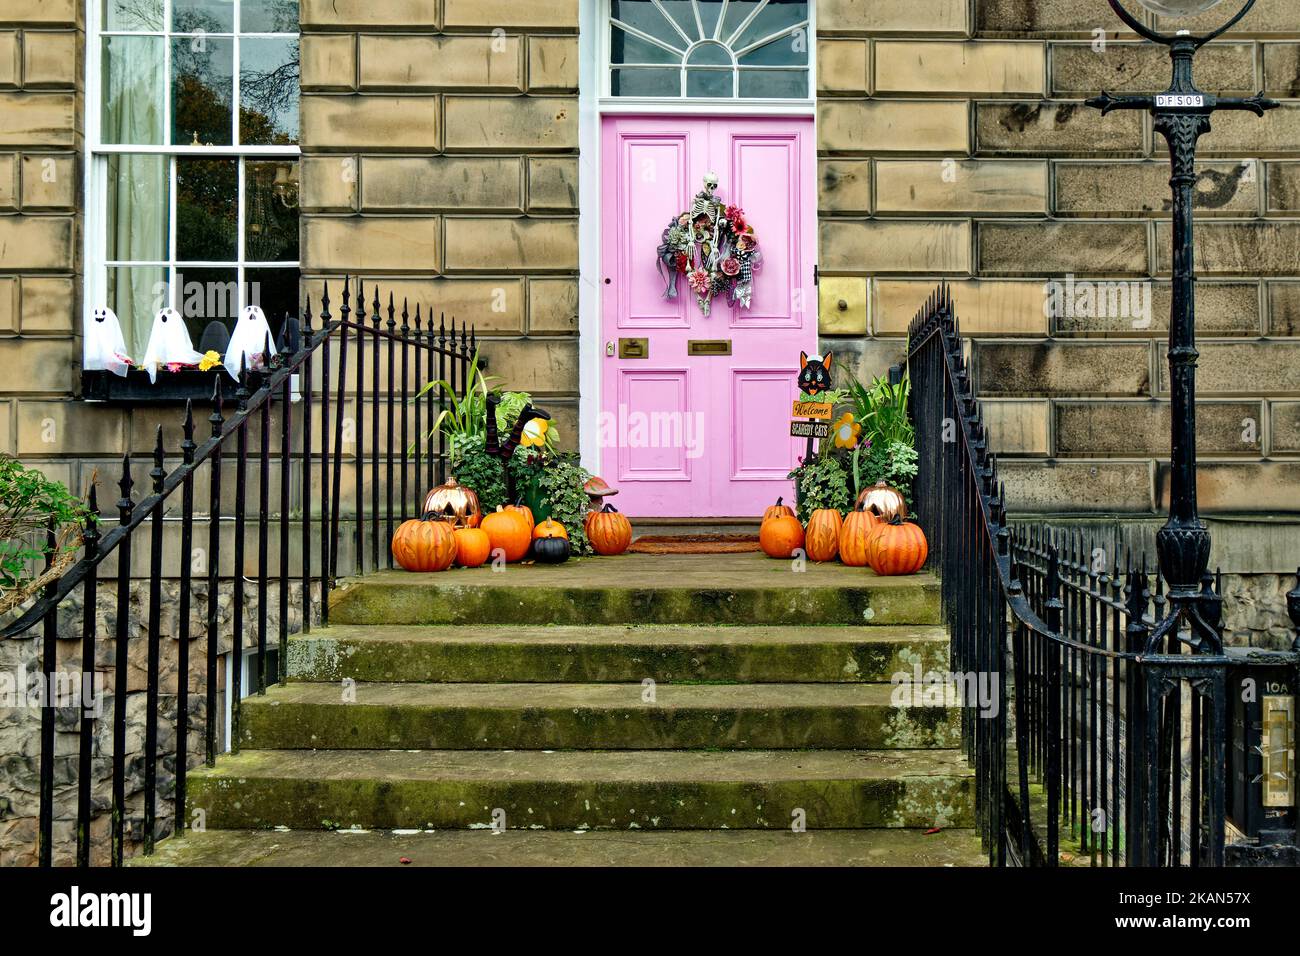 Edinburgh New Town Scotland a pink door on a Drummond Place house with a wreath and orange Halloween pumpkins Stock Photo